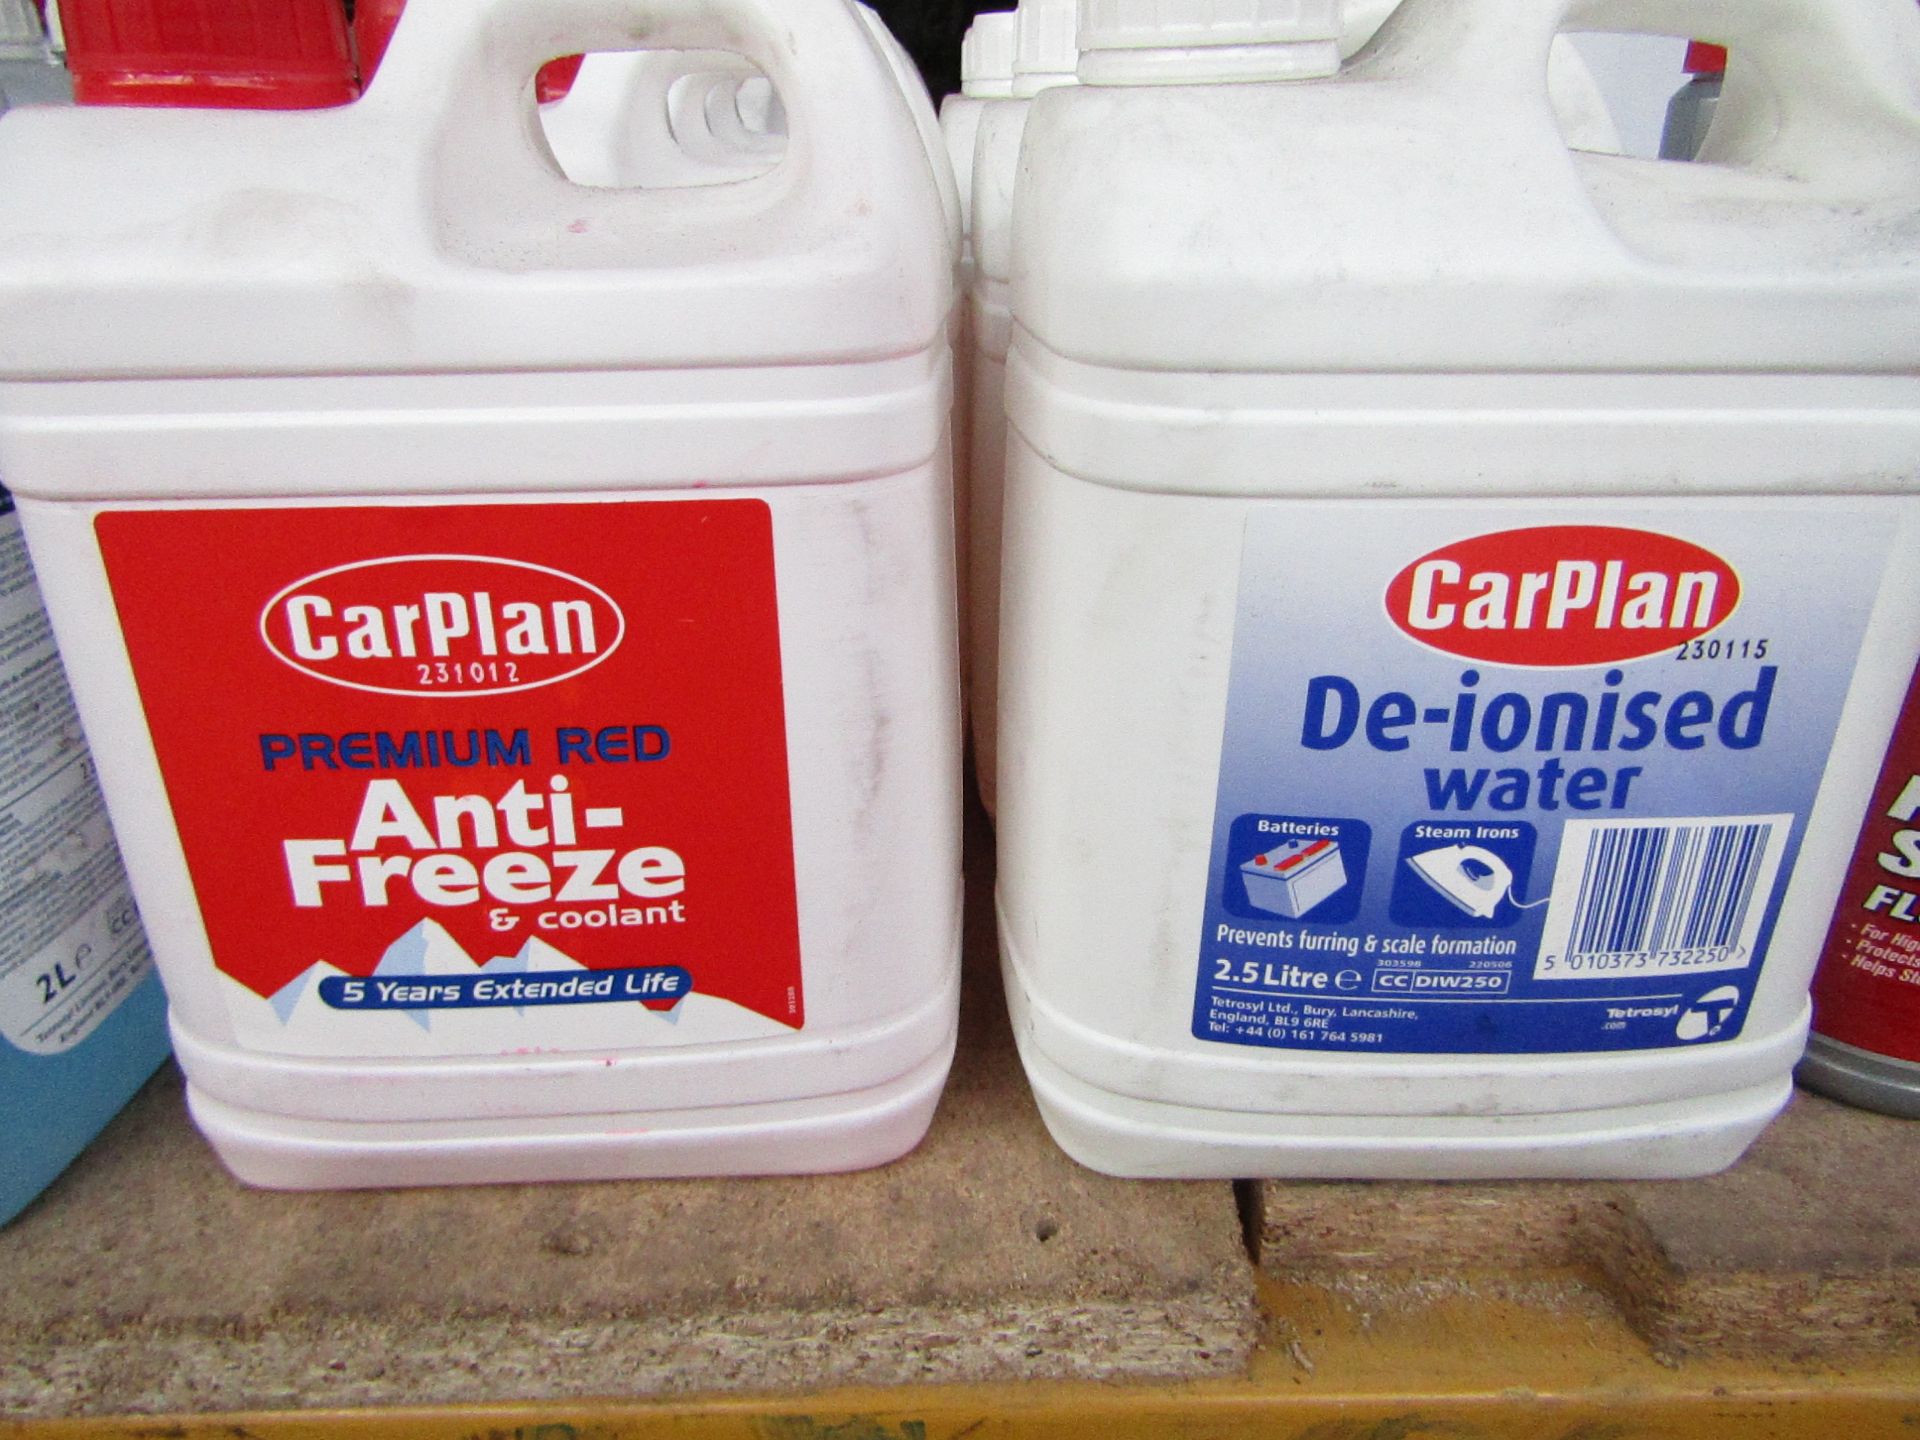 5x CarPlan - Red Advance Anti-Freeze & Coolant (5 Years Extended life) - 2 Litres - Sealed. 4x